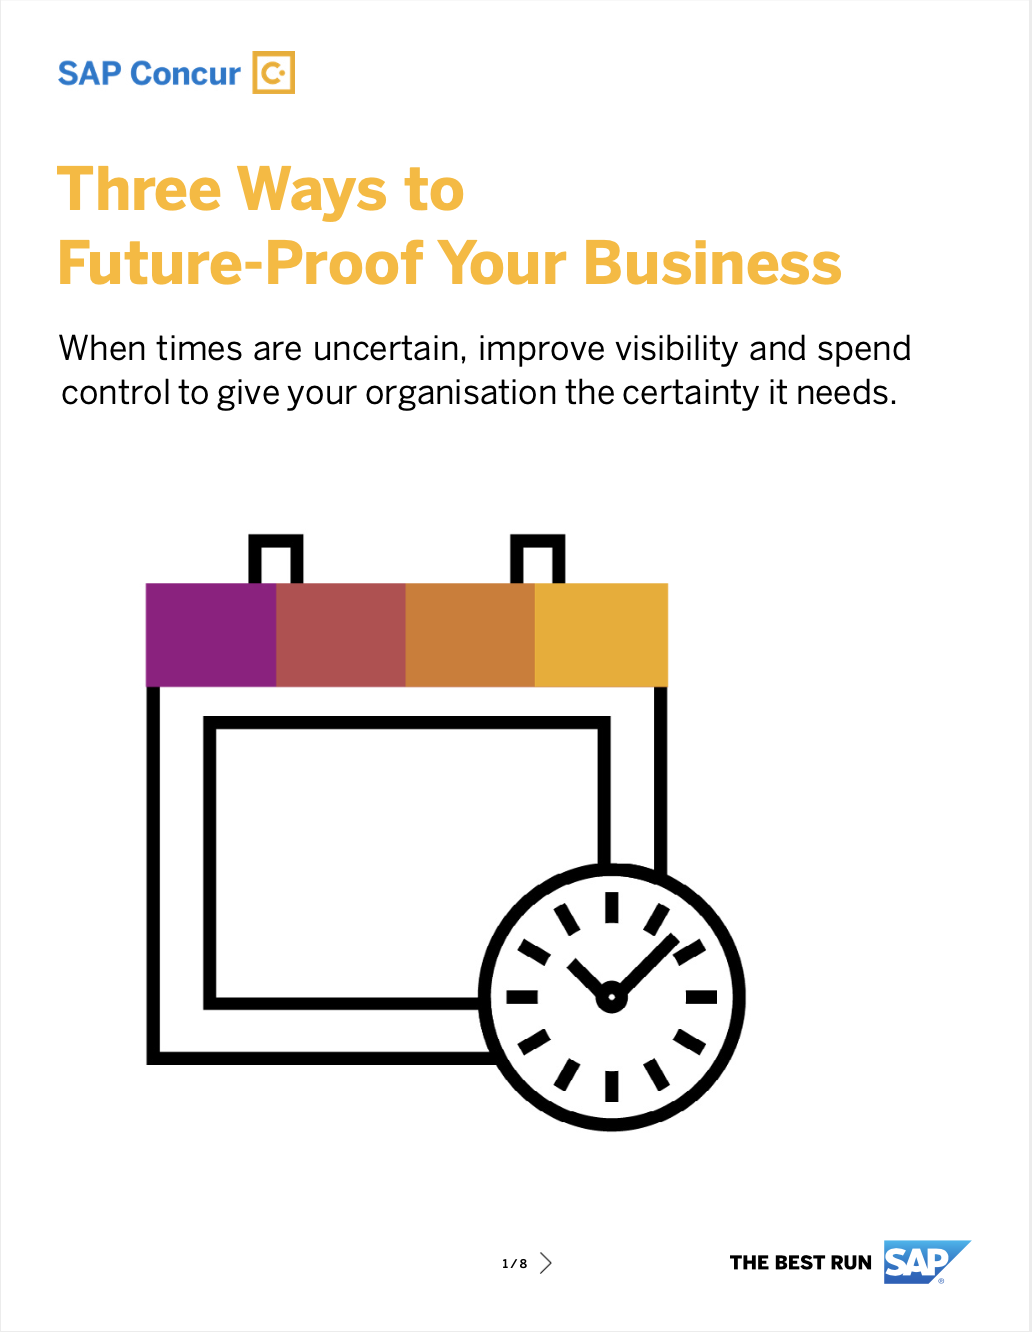 SAP Concur Three ways - Three Ways to Future-Proof Your Business